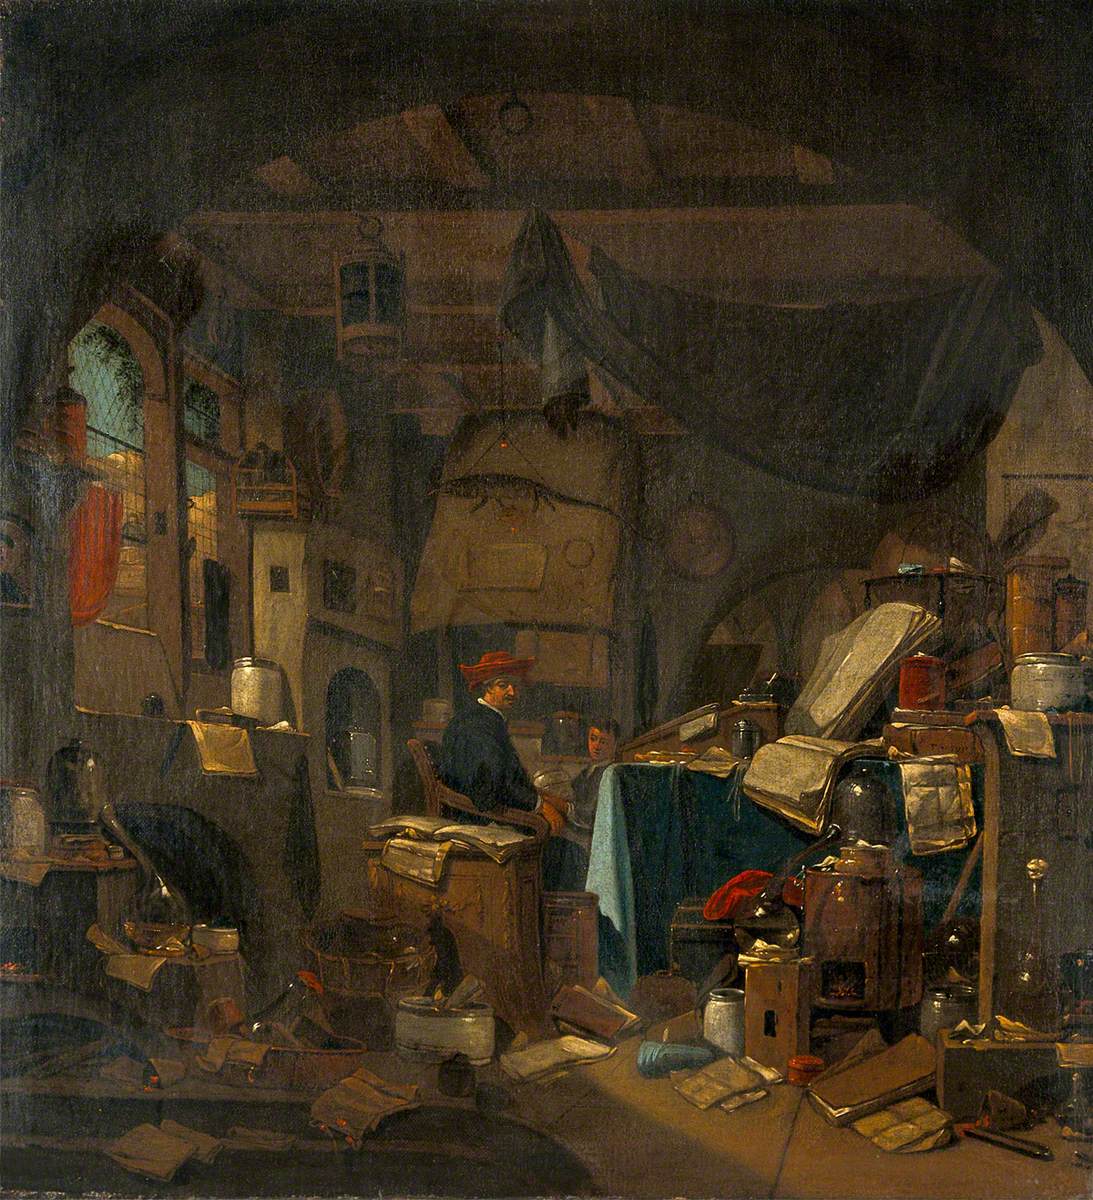 Interior with an Alchemist Seated at a Table, Looking out of the Picture